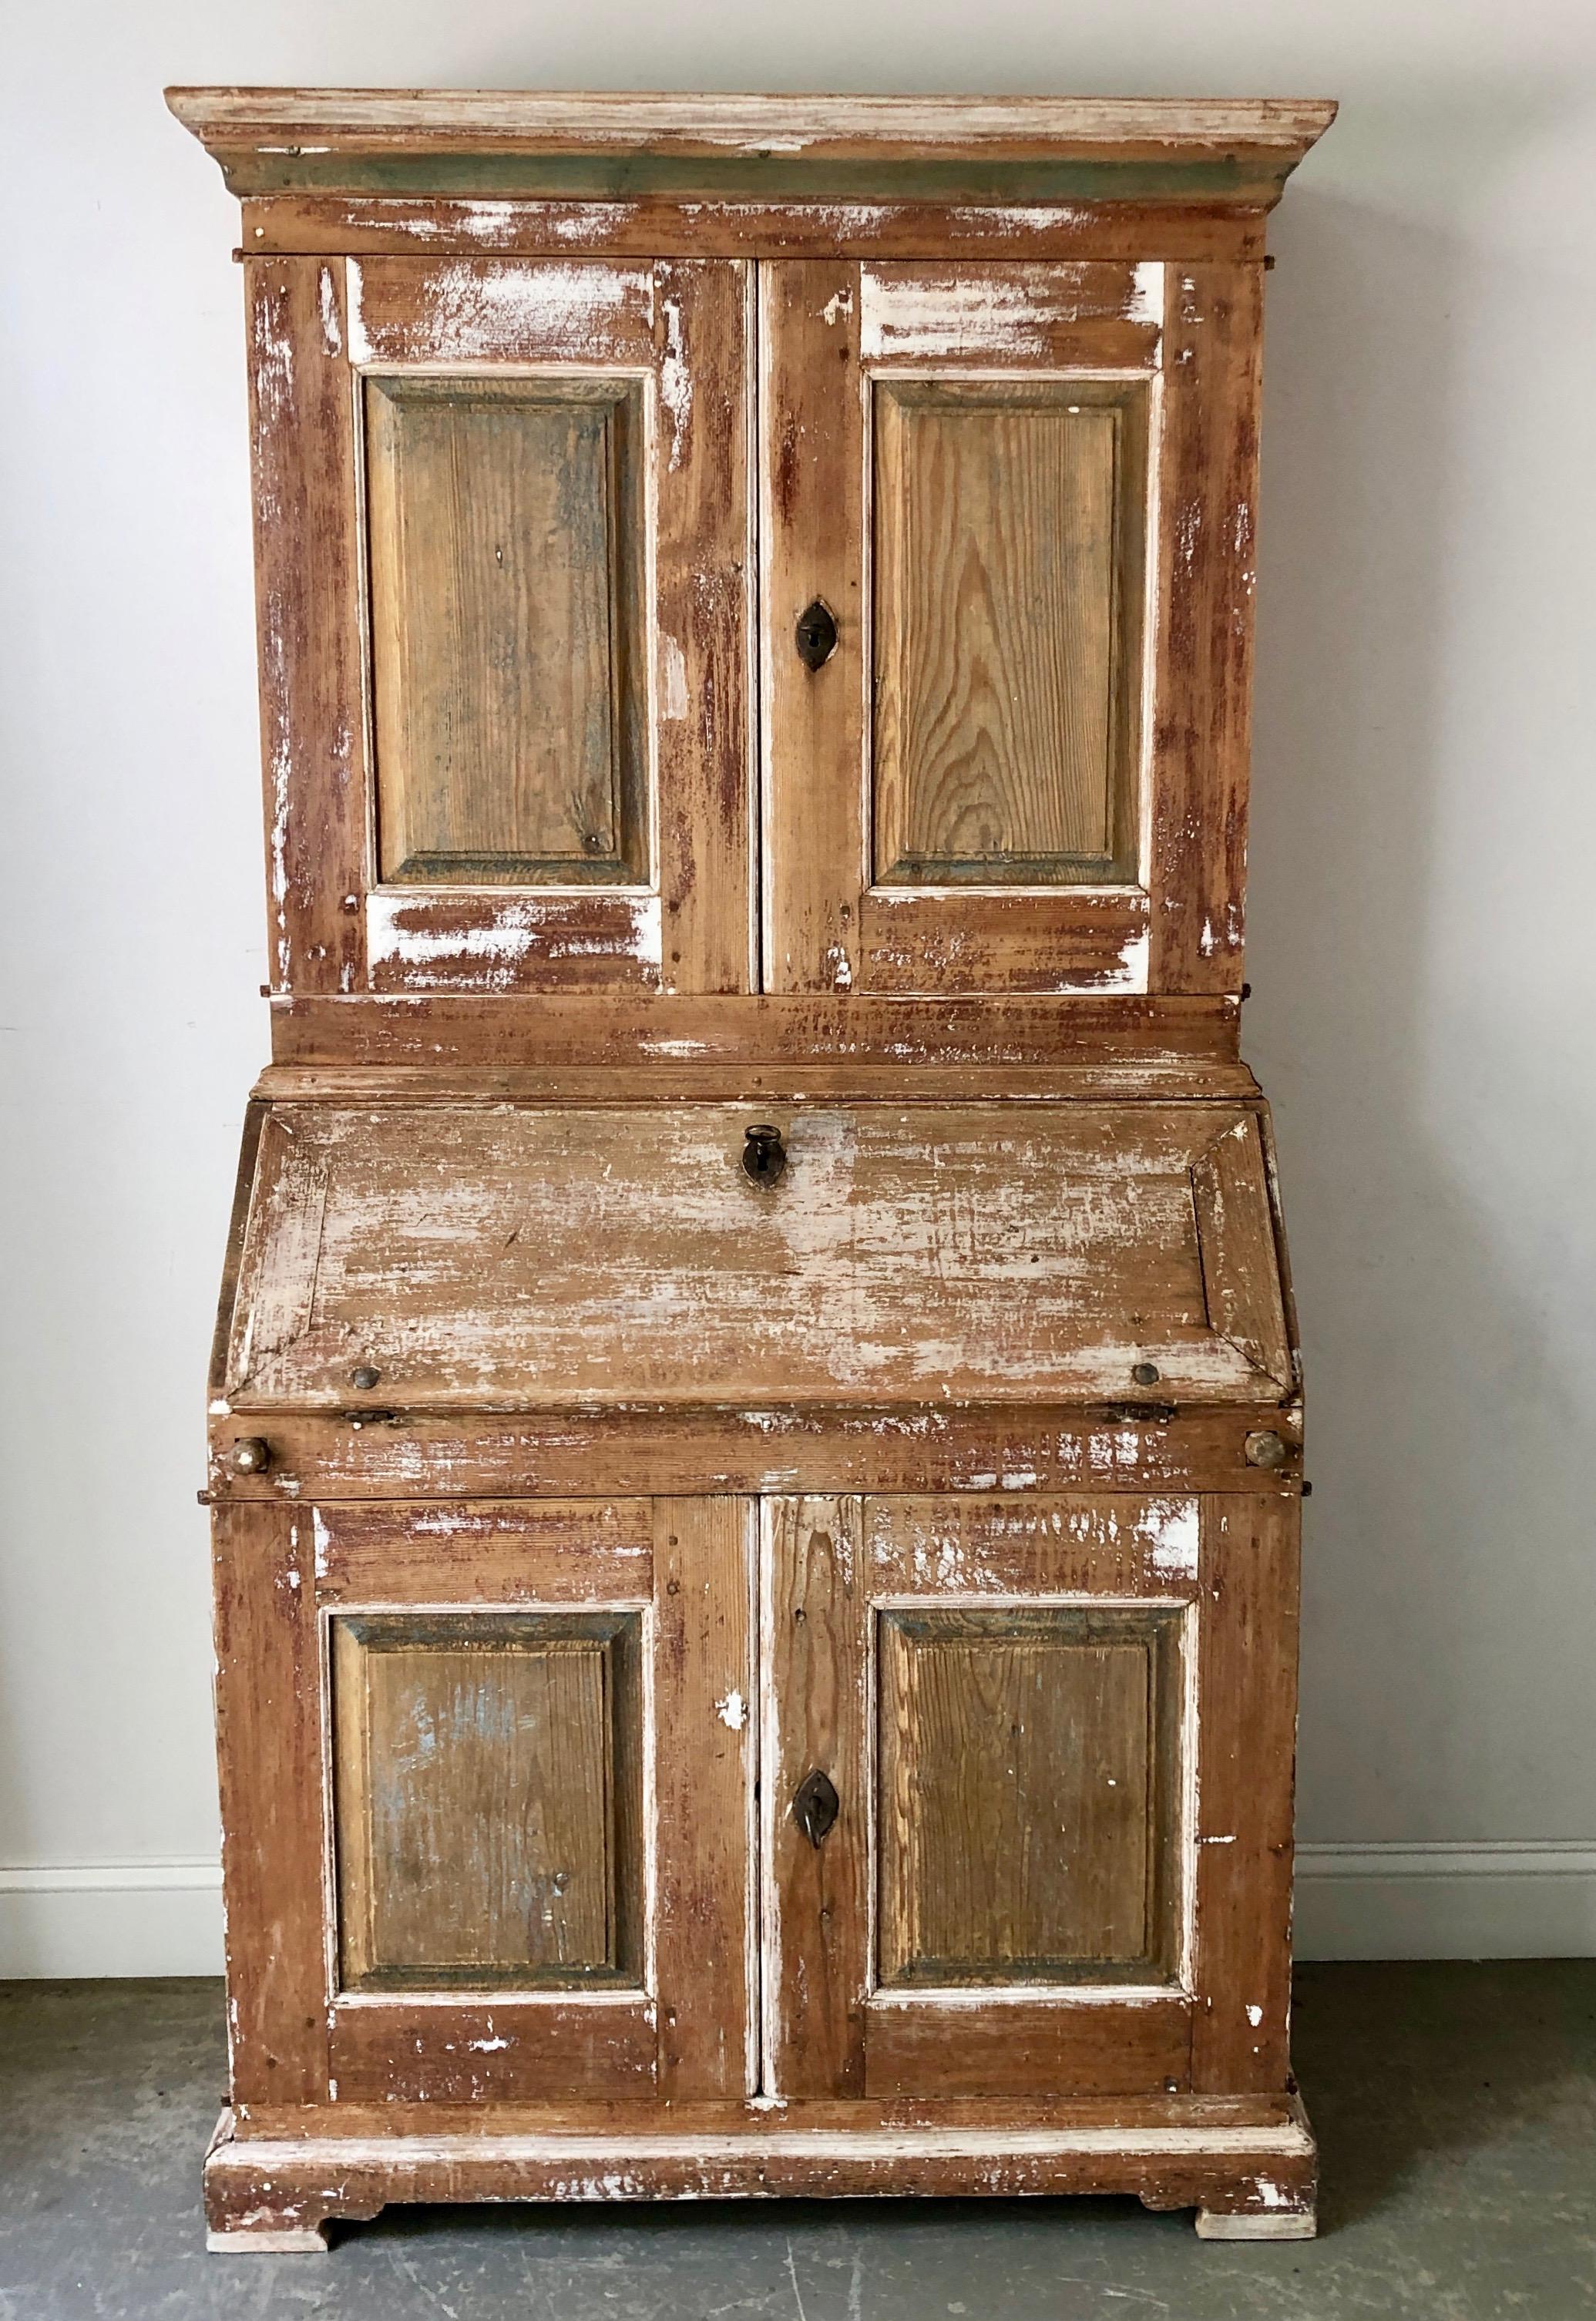 Charming 19th century Swedish country secretary with library cabinet in two parts with molded cornice and three fixed shelves behind the raised panel doors. The lower section has a slant front desk with a fitted interior over the two raised panel